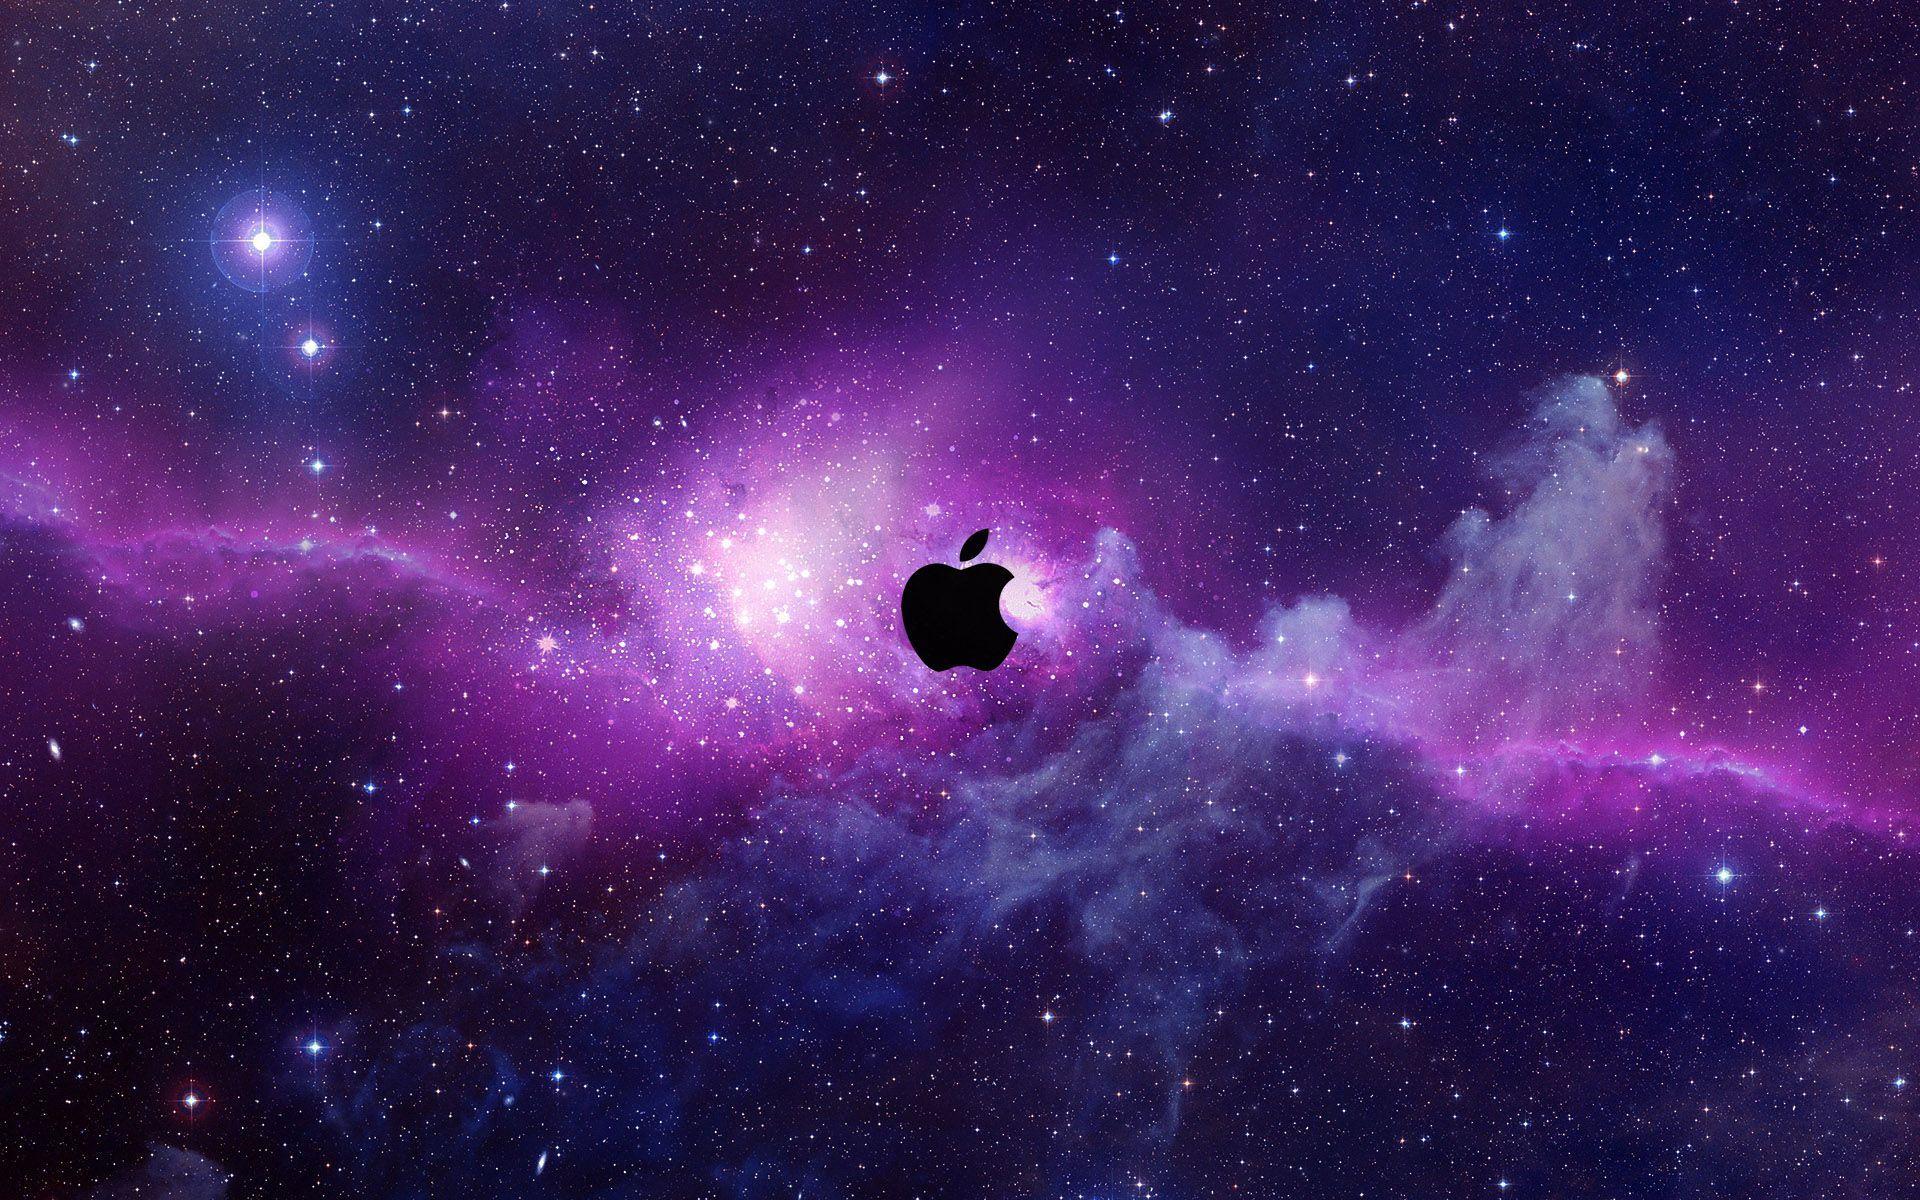 Apple Mac Wallpaper for your desktop to give it a new and fresh